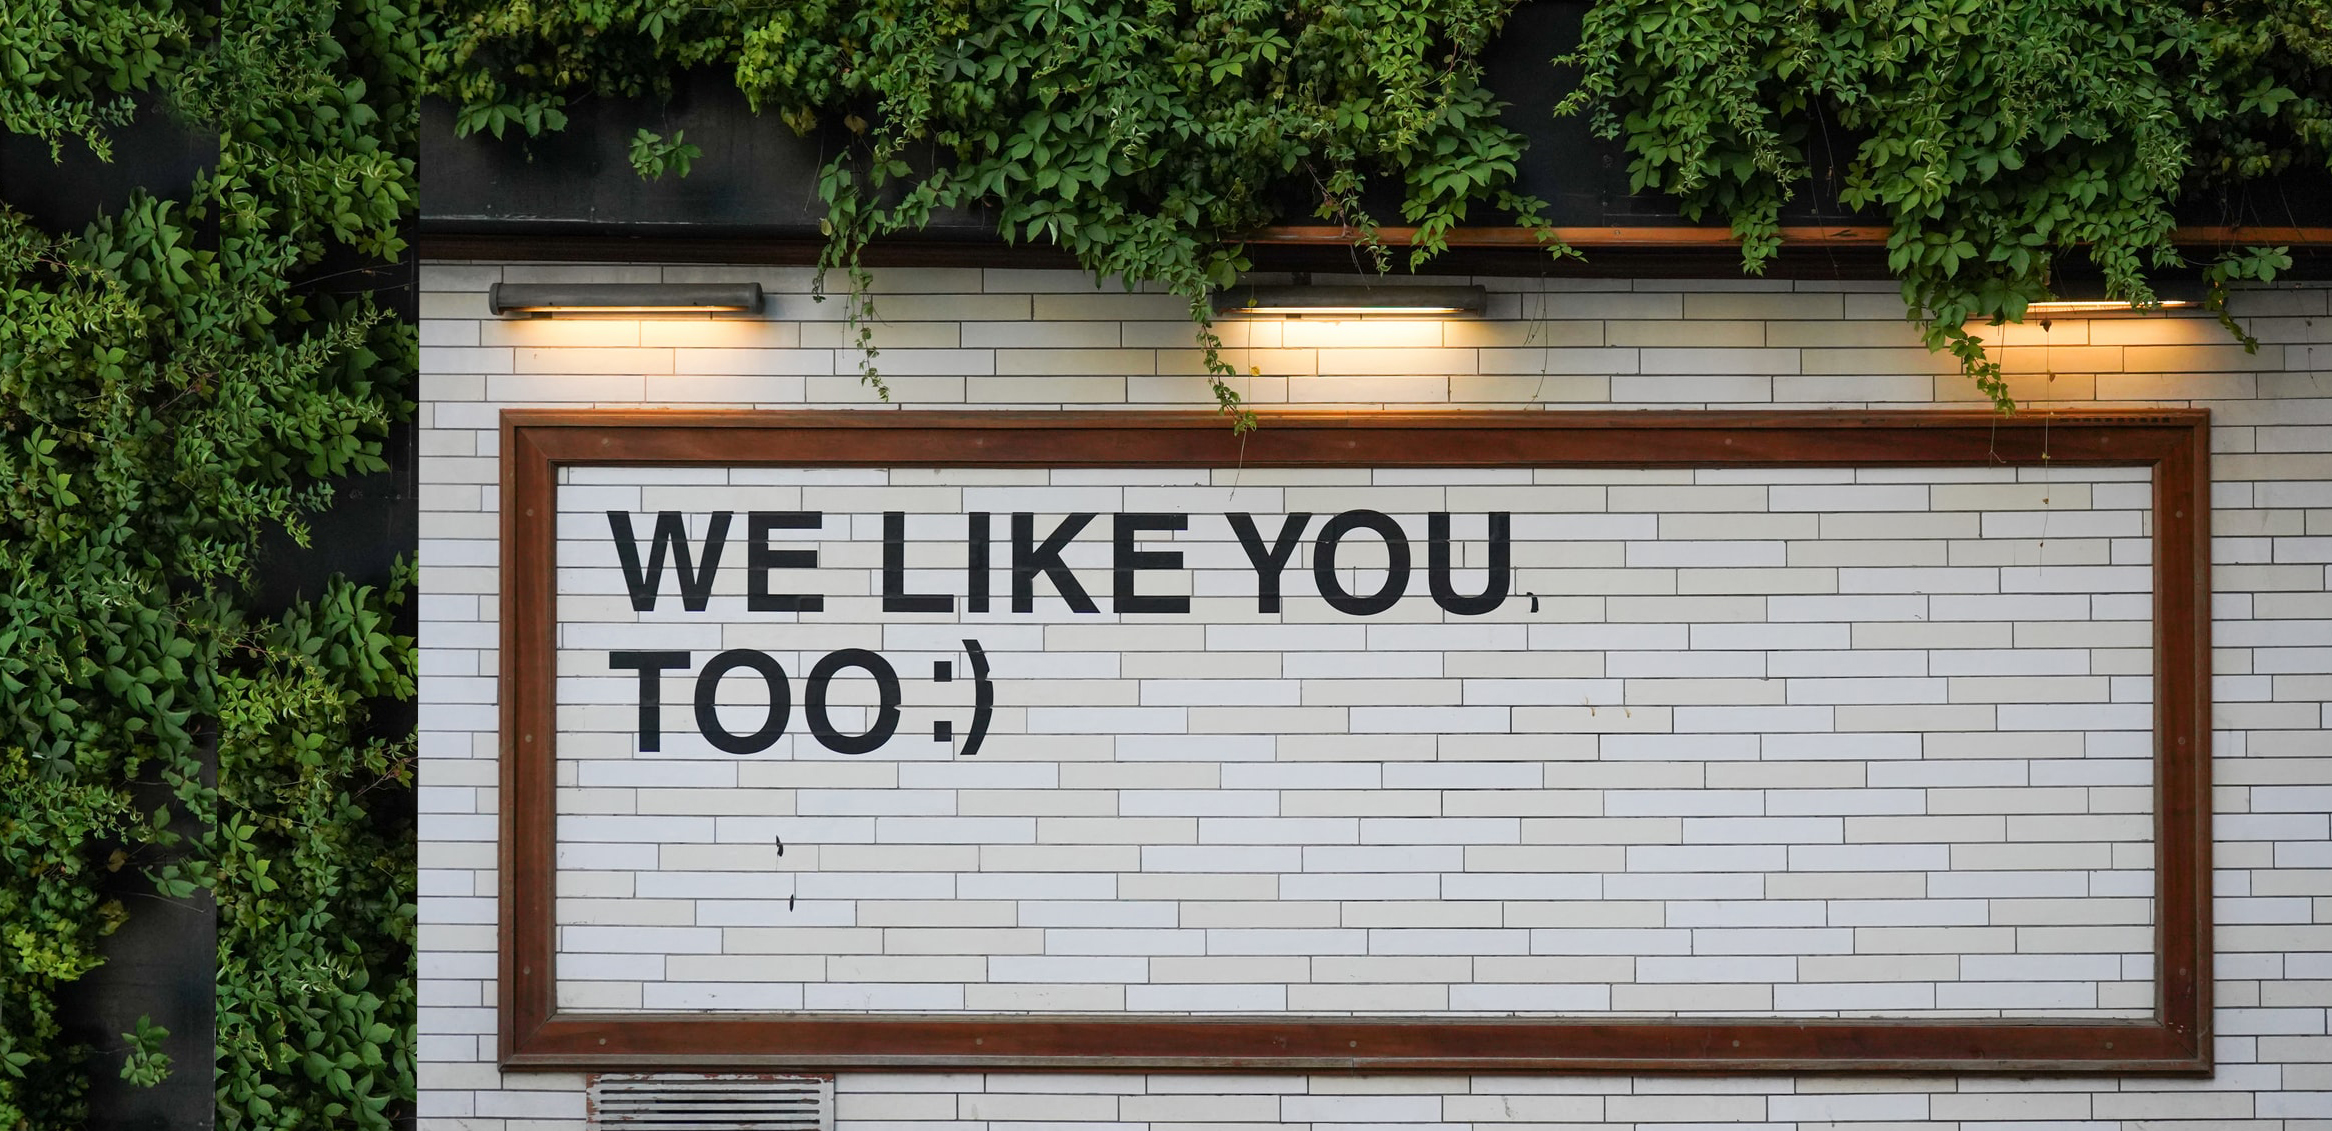 Photograph of a mural with the sign We like you too